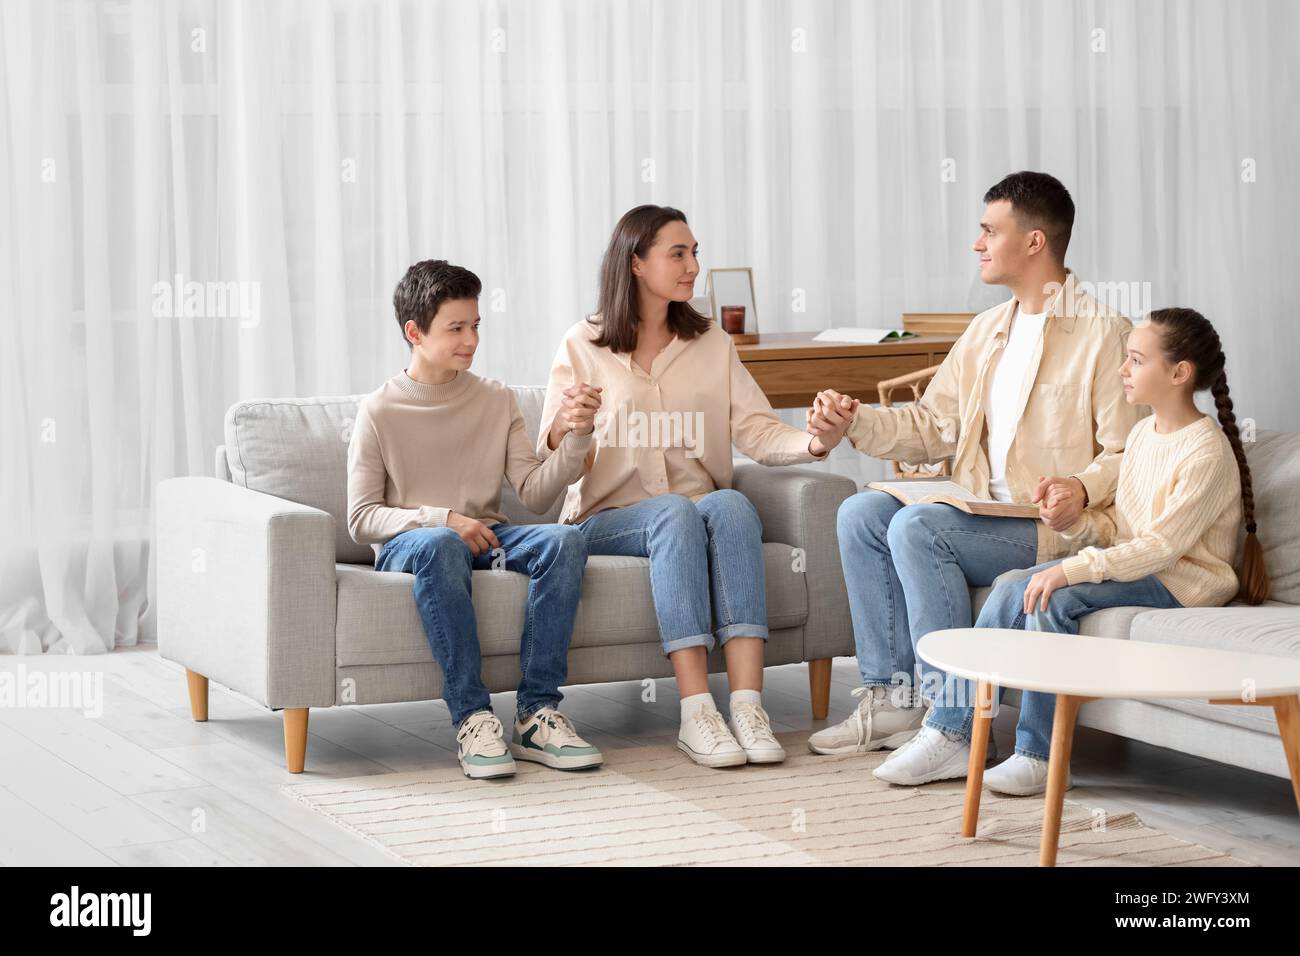 Family with Holy Bible praying on sofa at home Stock Photo